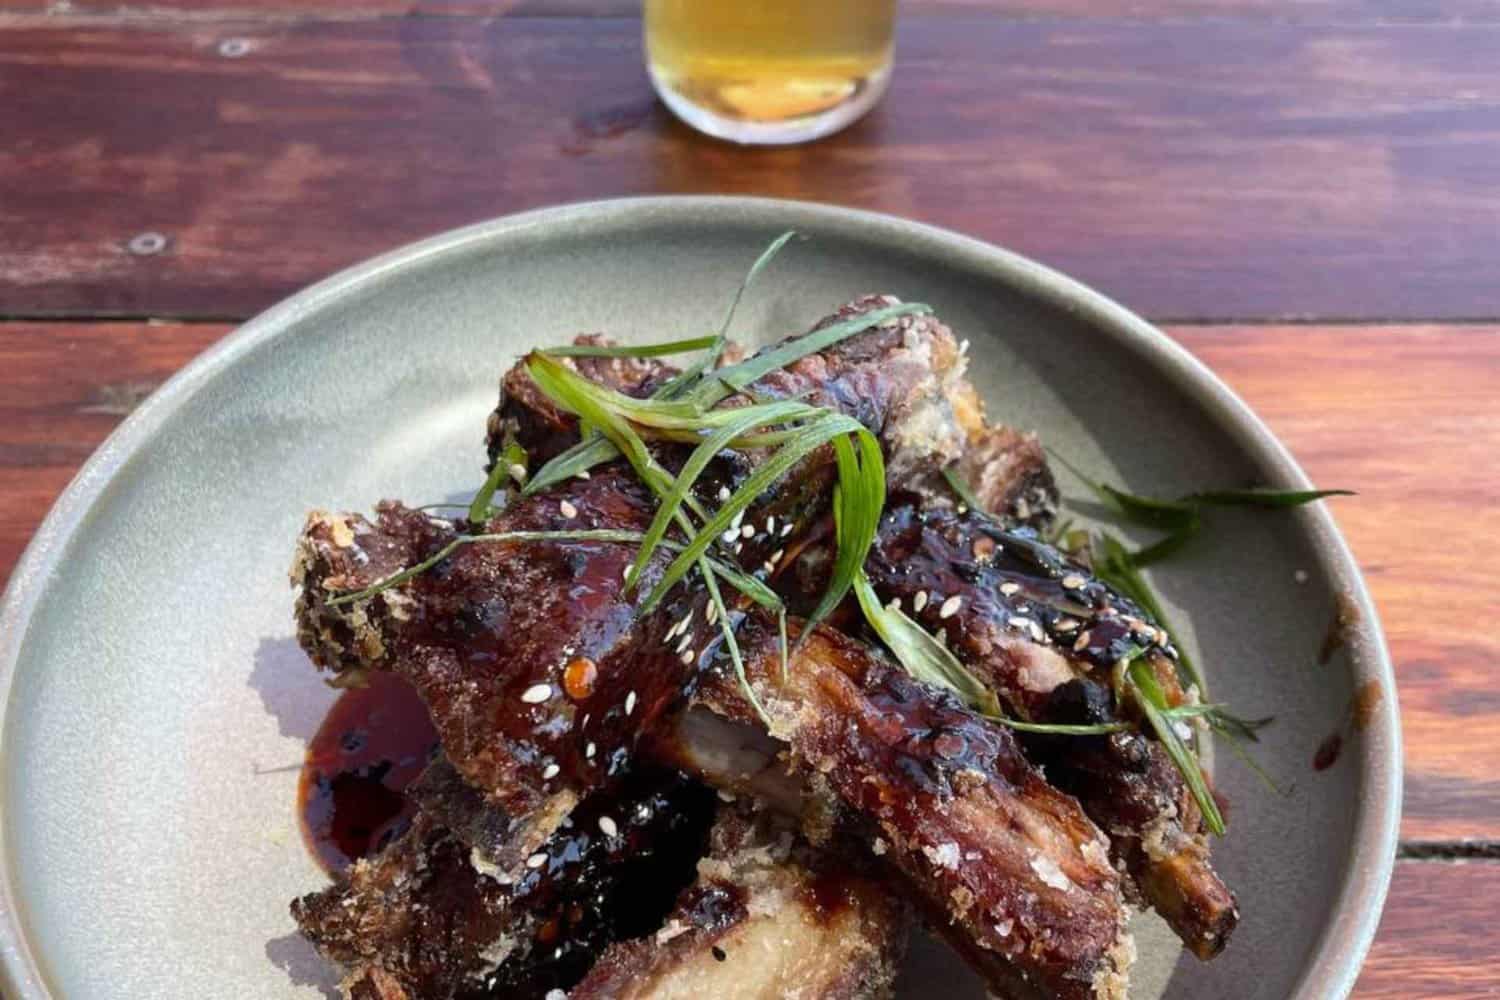 A mouth-watering photo of sticky ribs served at a brewery in Margaret River, with the meat falling off the bone and a savory glaze on top. The ribs are topped with spring onion creating a hearty and satisfying meal.